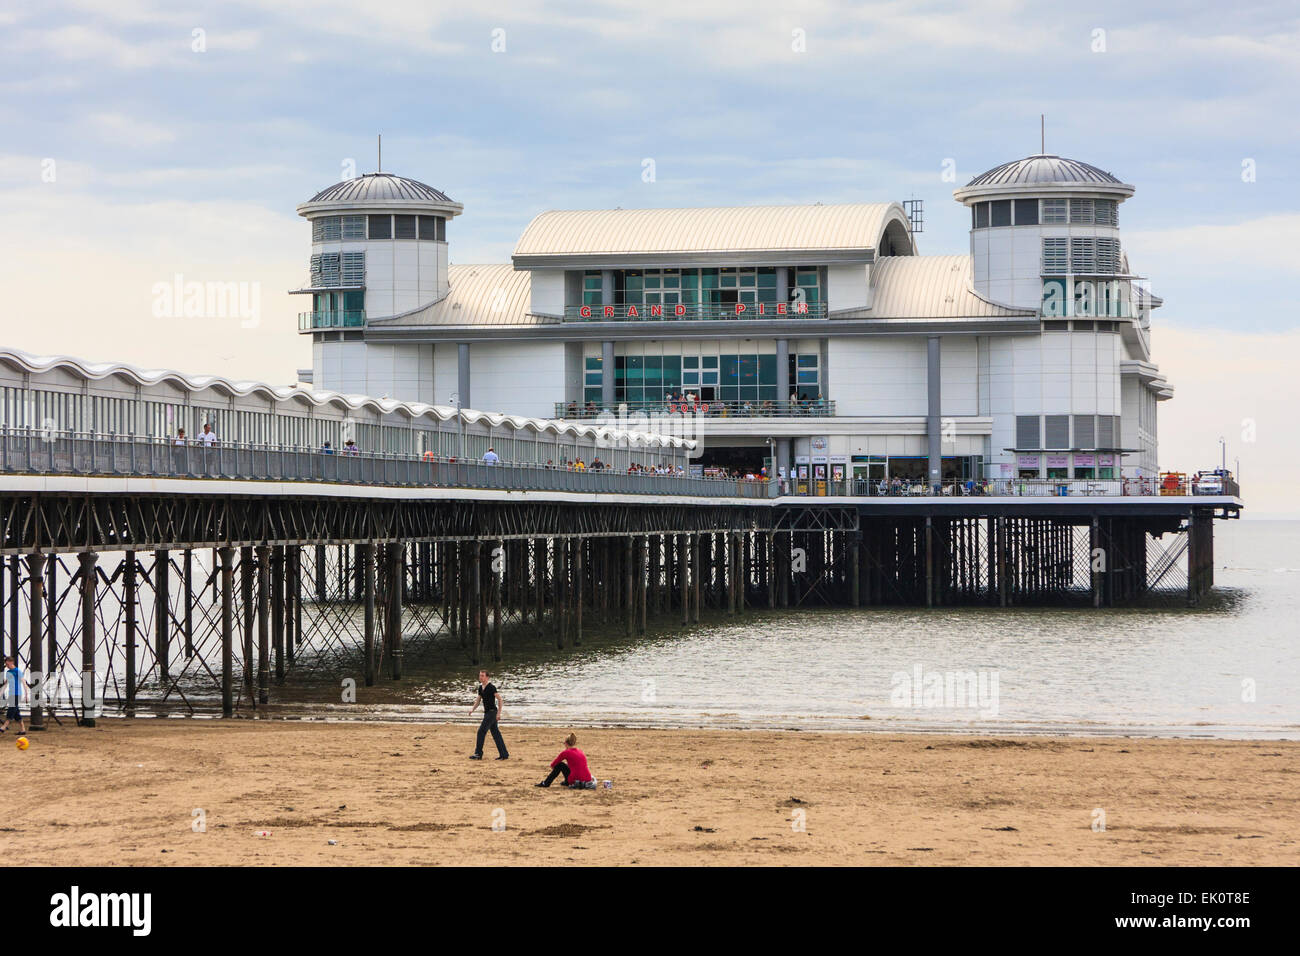 Weston super mare beach with the pier in the background Stock Photo